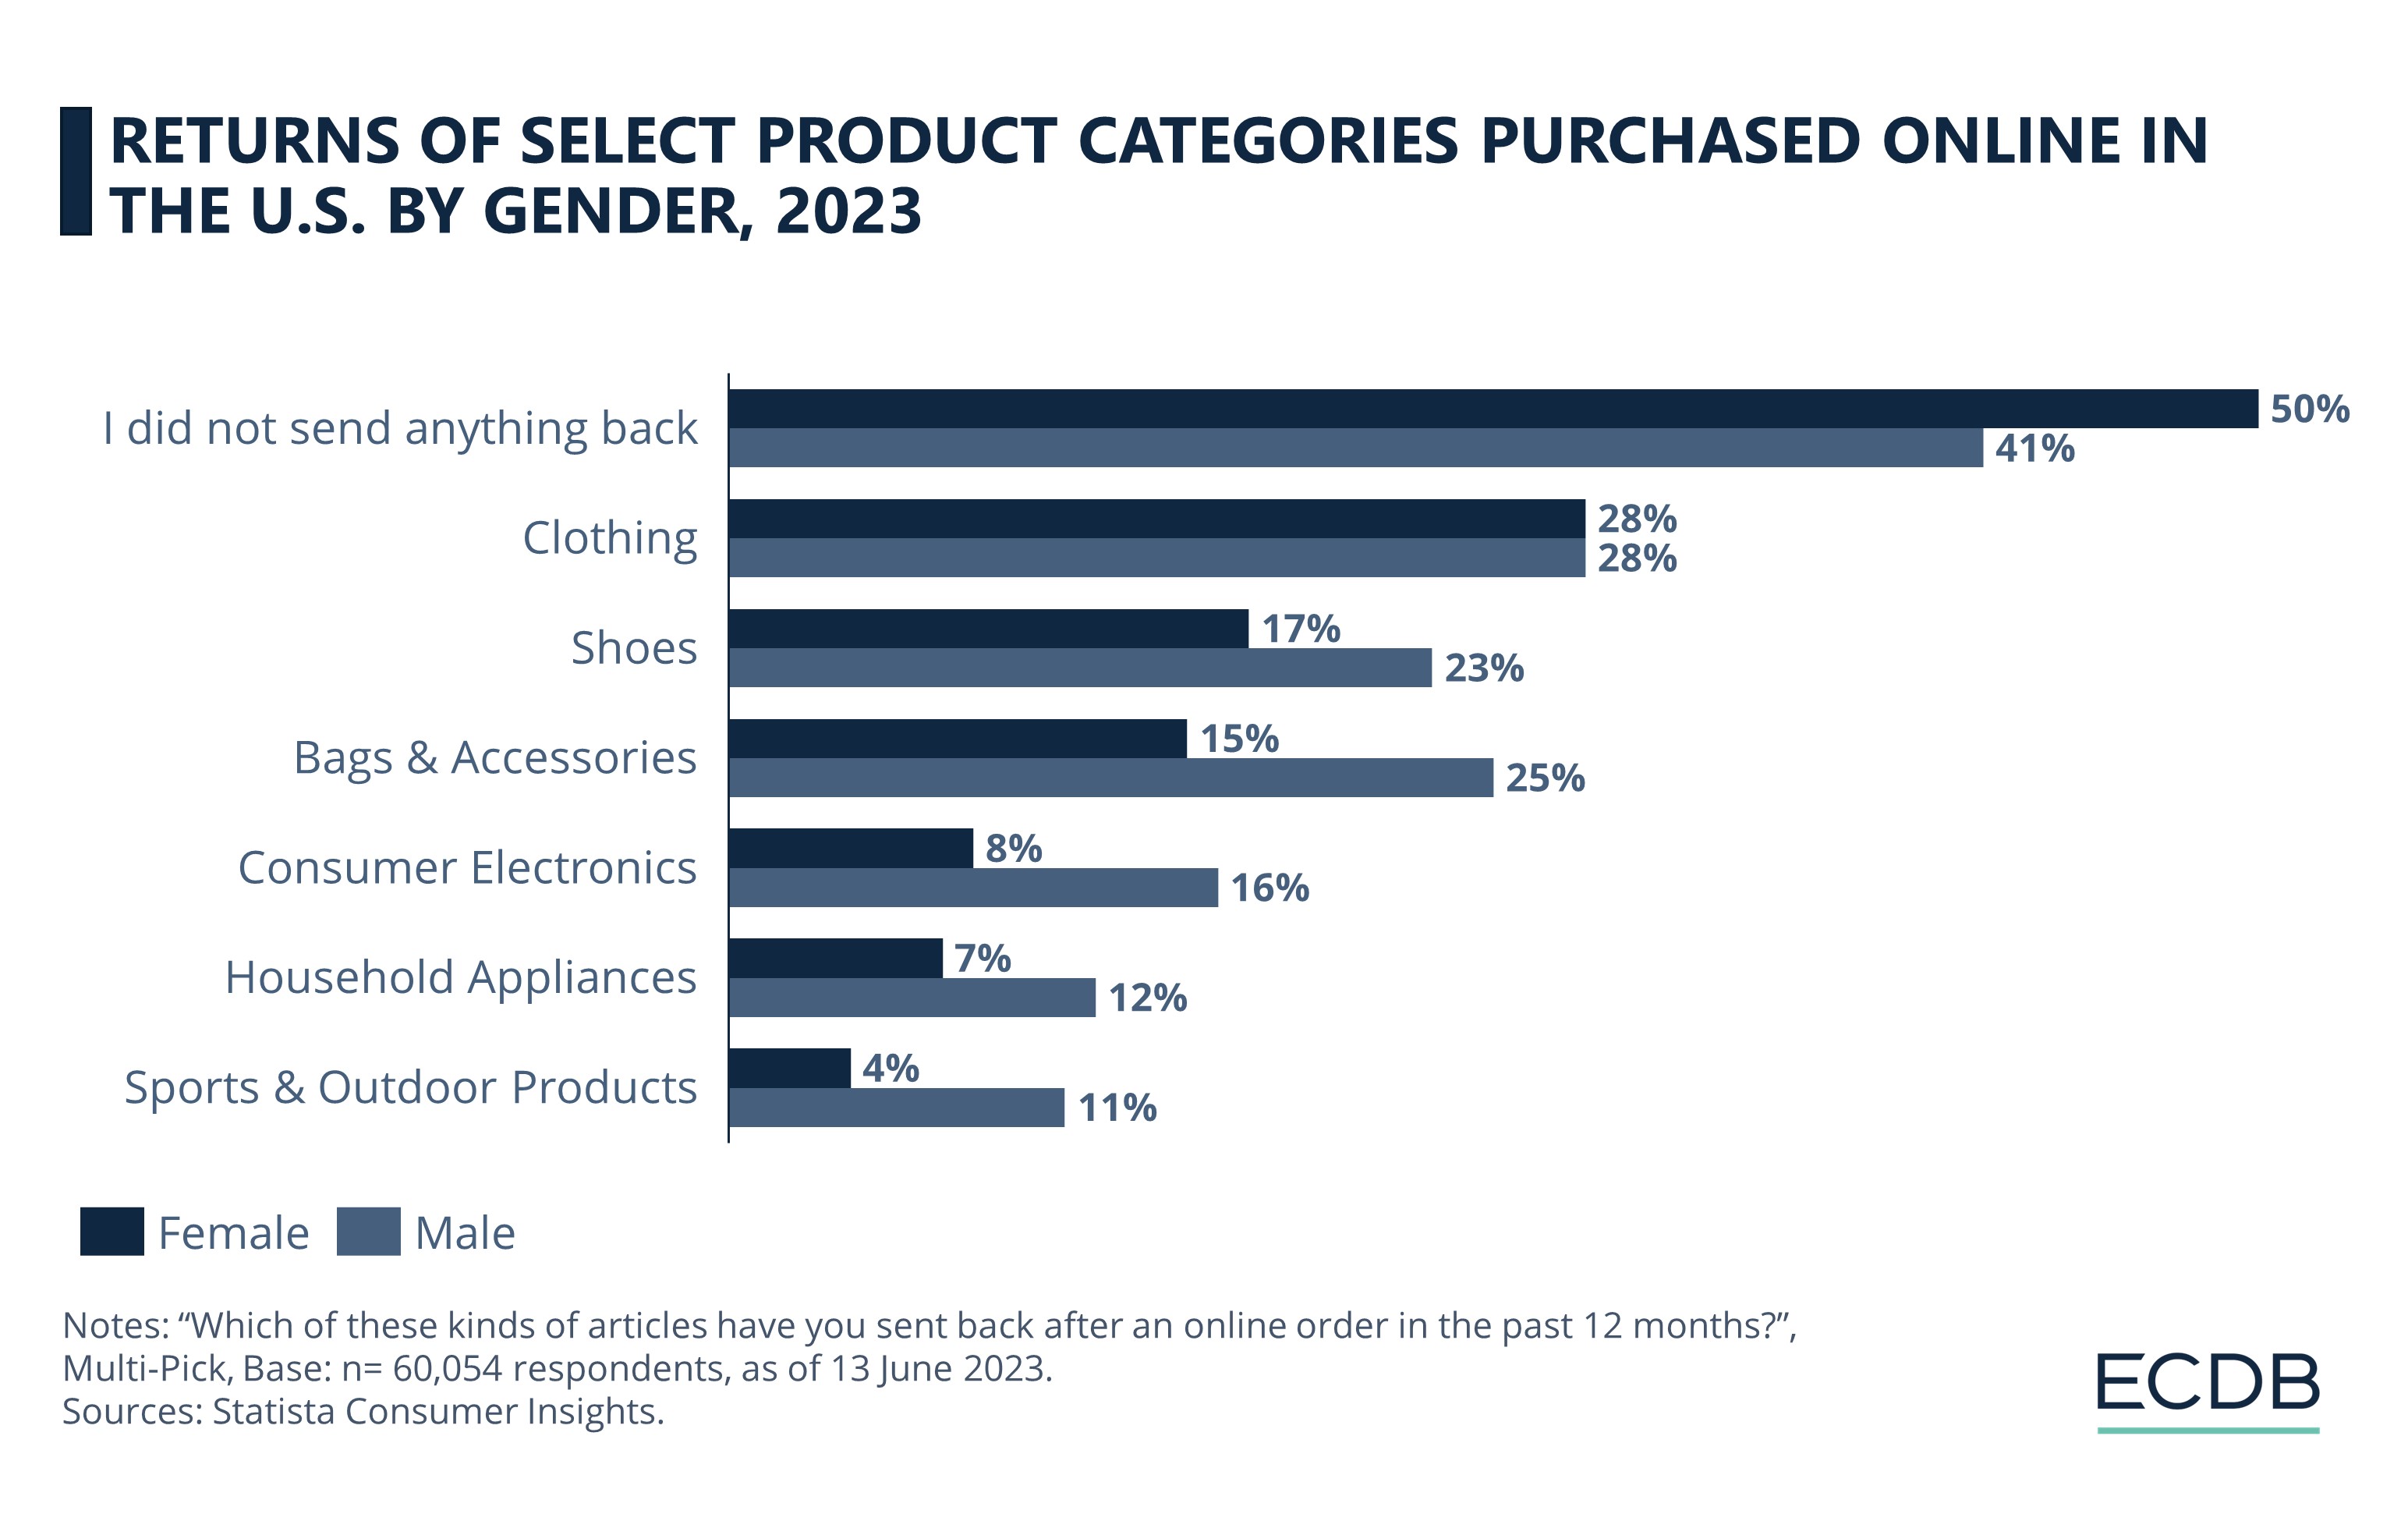 Returns of select product categories purchased online in the U.S., by gender, 2023